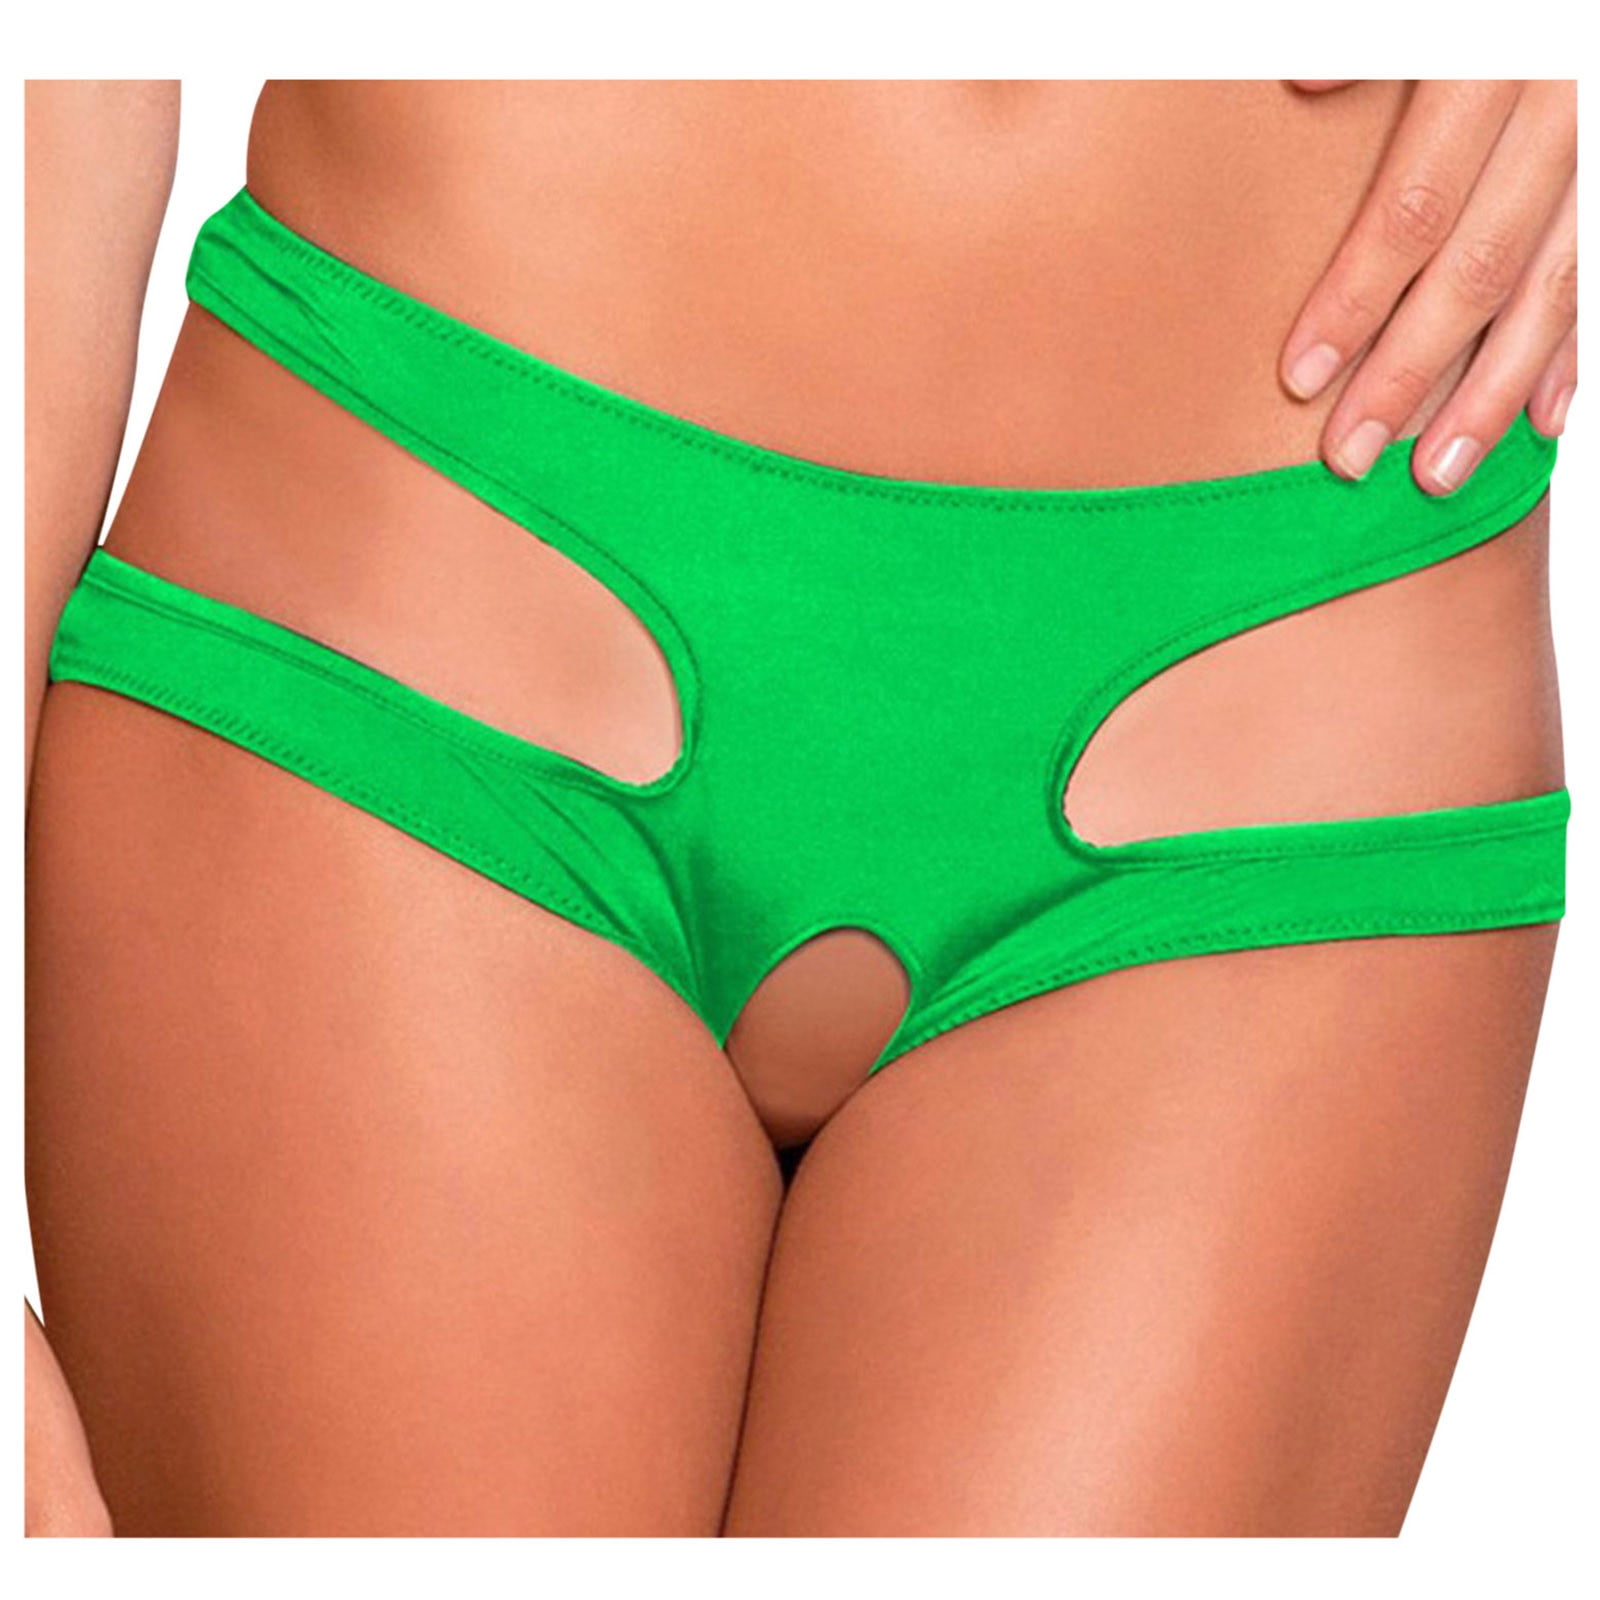 Green Open Bust Lingerie Porn - dmqupv Women's Lingerie Sexy Push up Super Underwear Plus Size Sexy File  Open Fashion Sexy for Women Large Breast Underpants Green X-Large -  Walmart.com